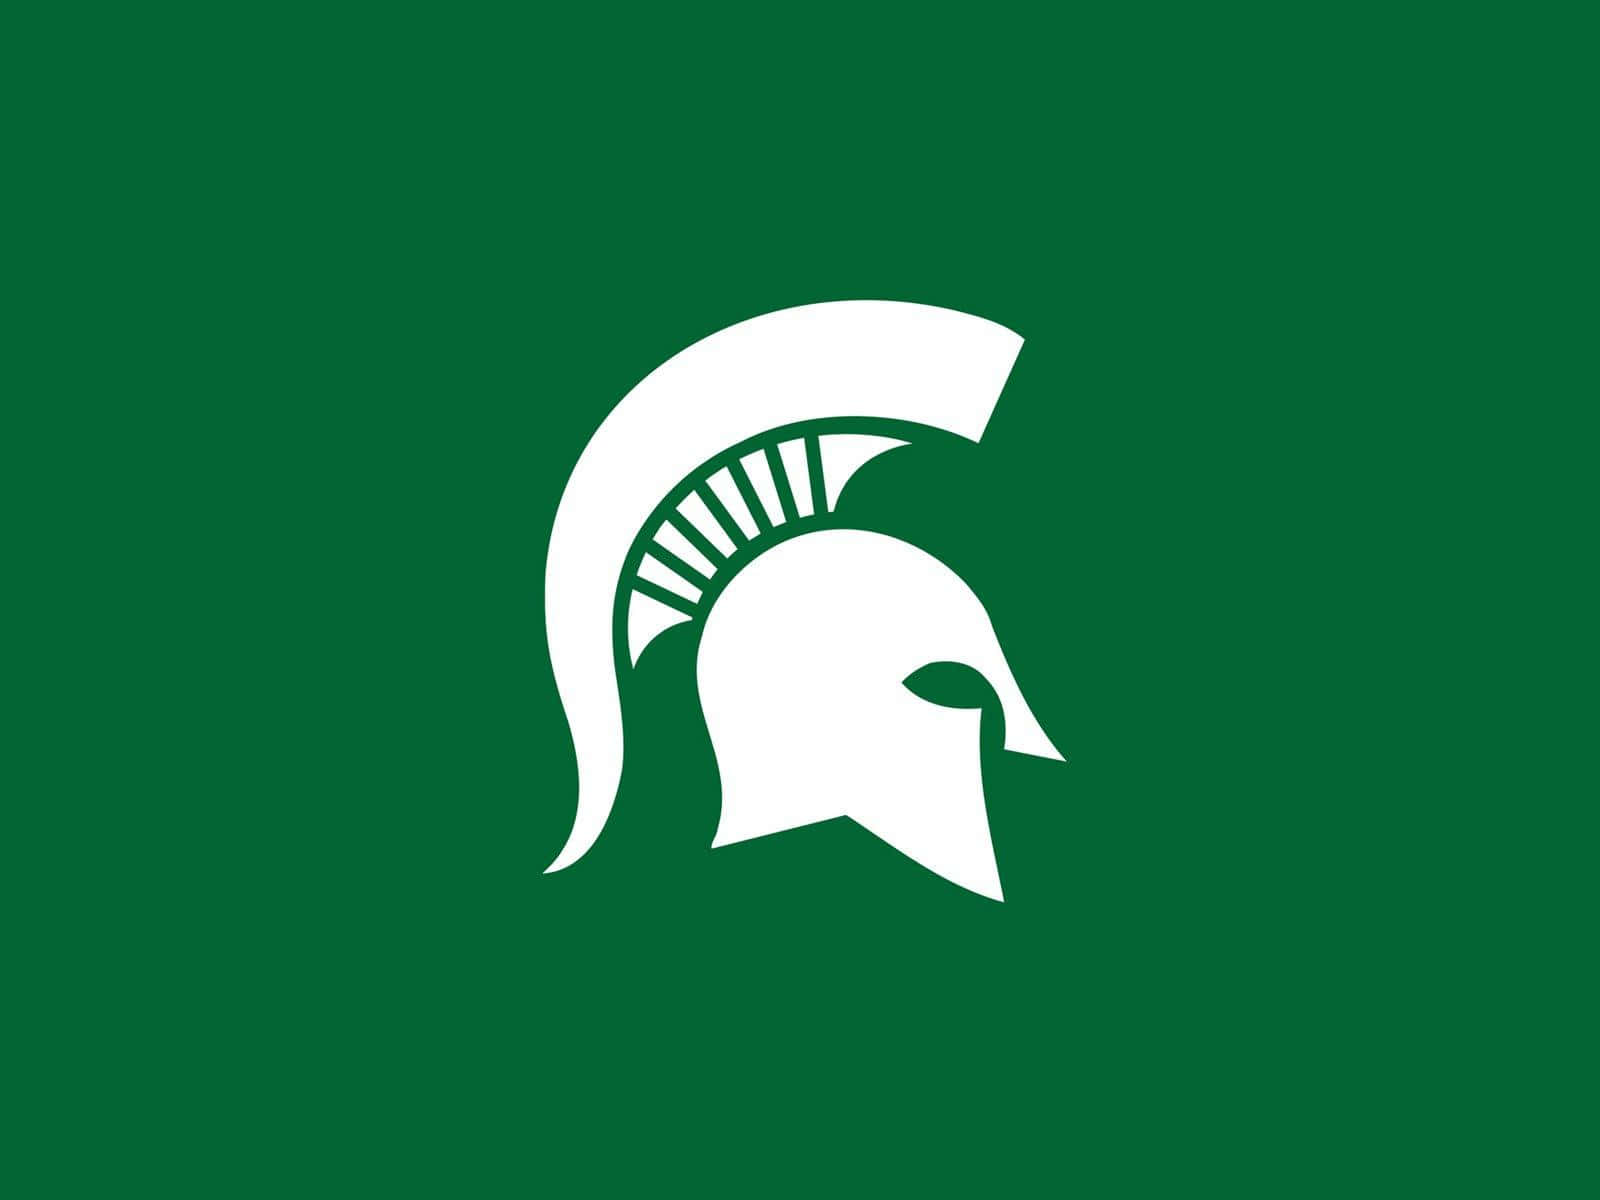 MICHIGAN STATE SPARTANS college football wallpaper  1920x1080  595902   WallpaperUP